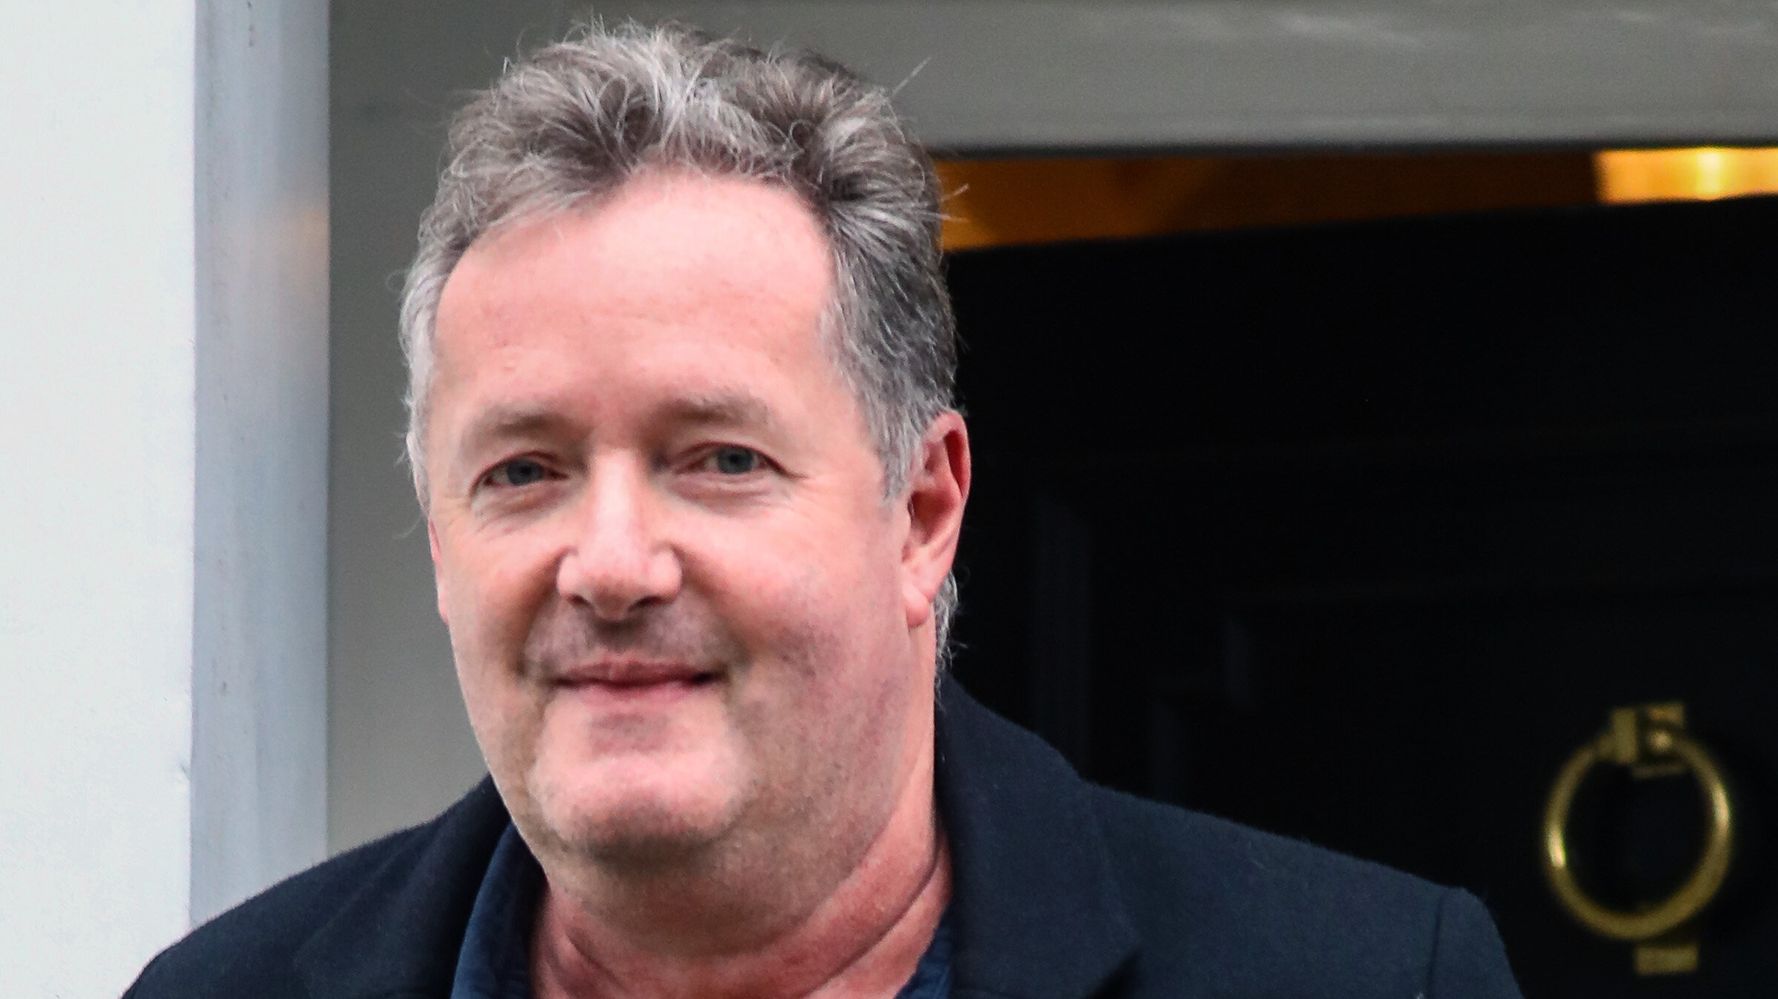 Piers Morgan claims that members of the royal family sent thanks to Meghan Markle Rant